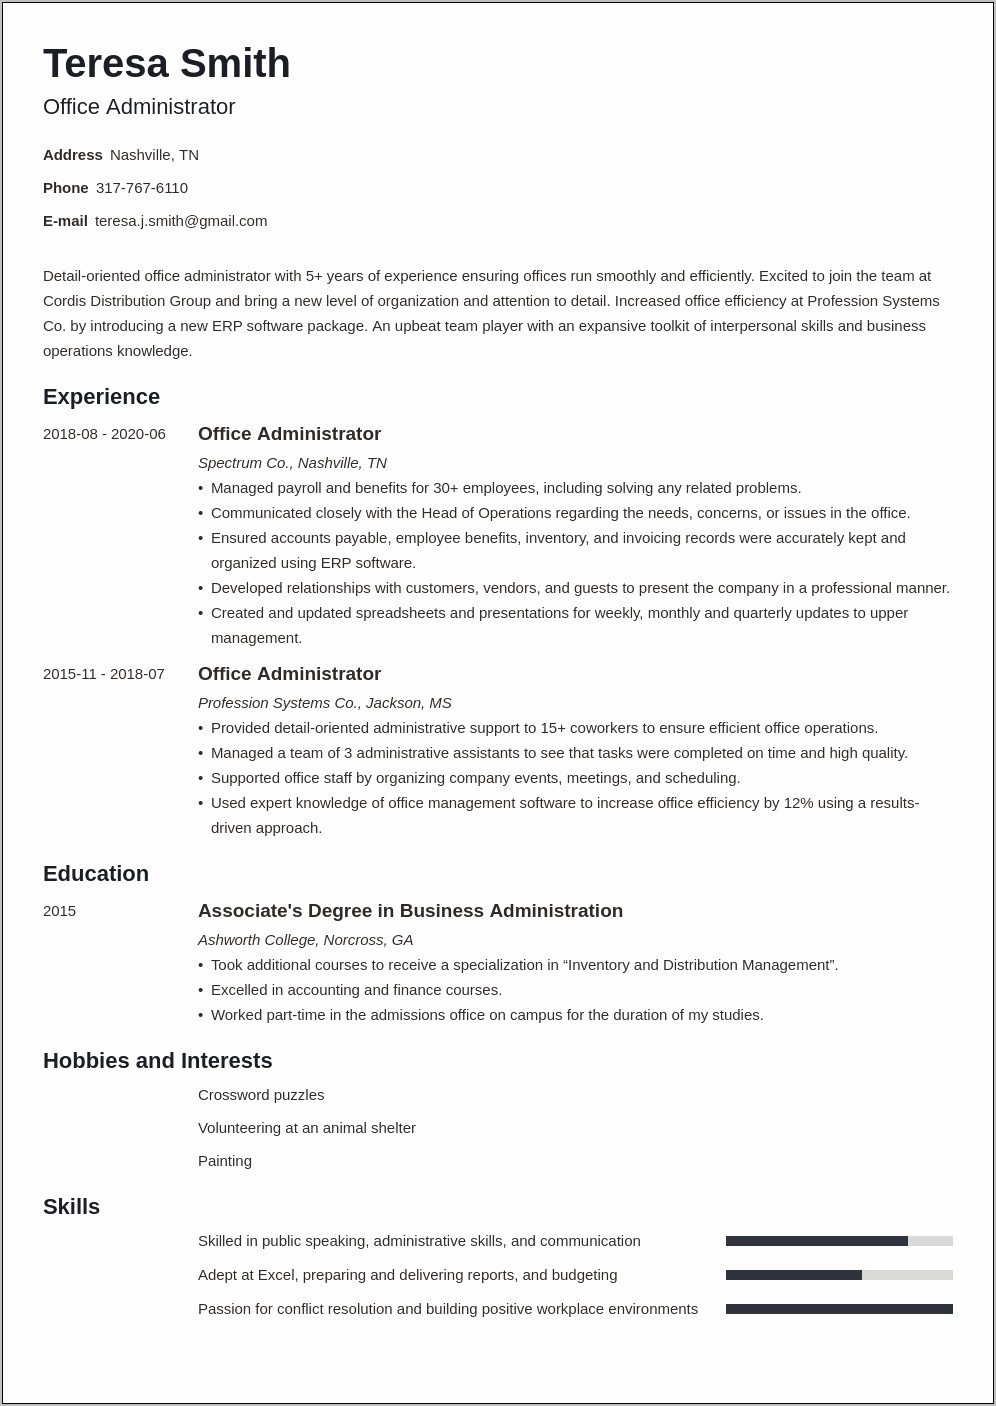 Objective Statement For Office Manager Resume